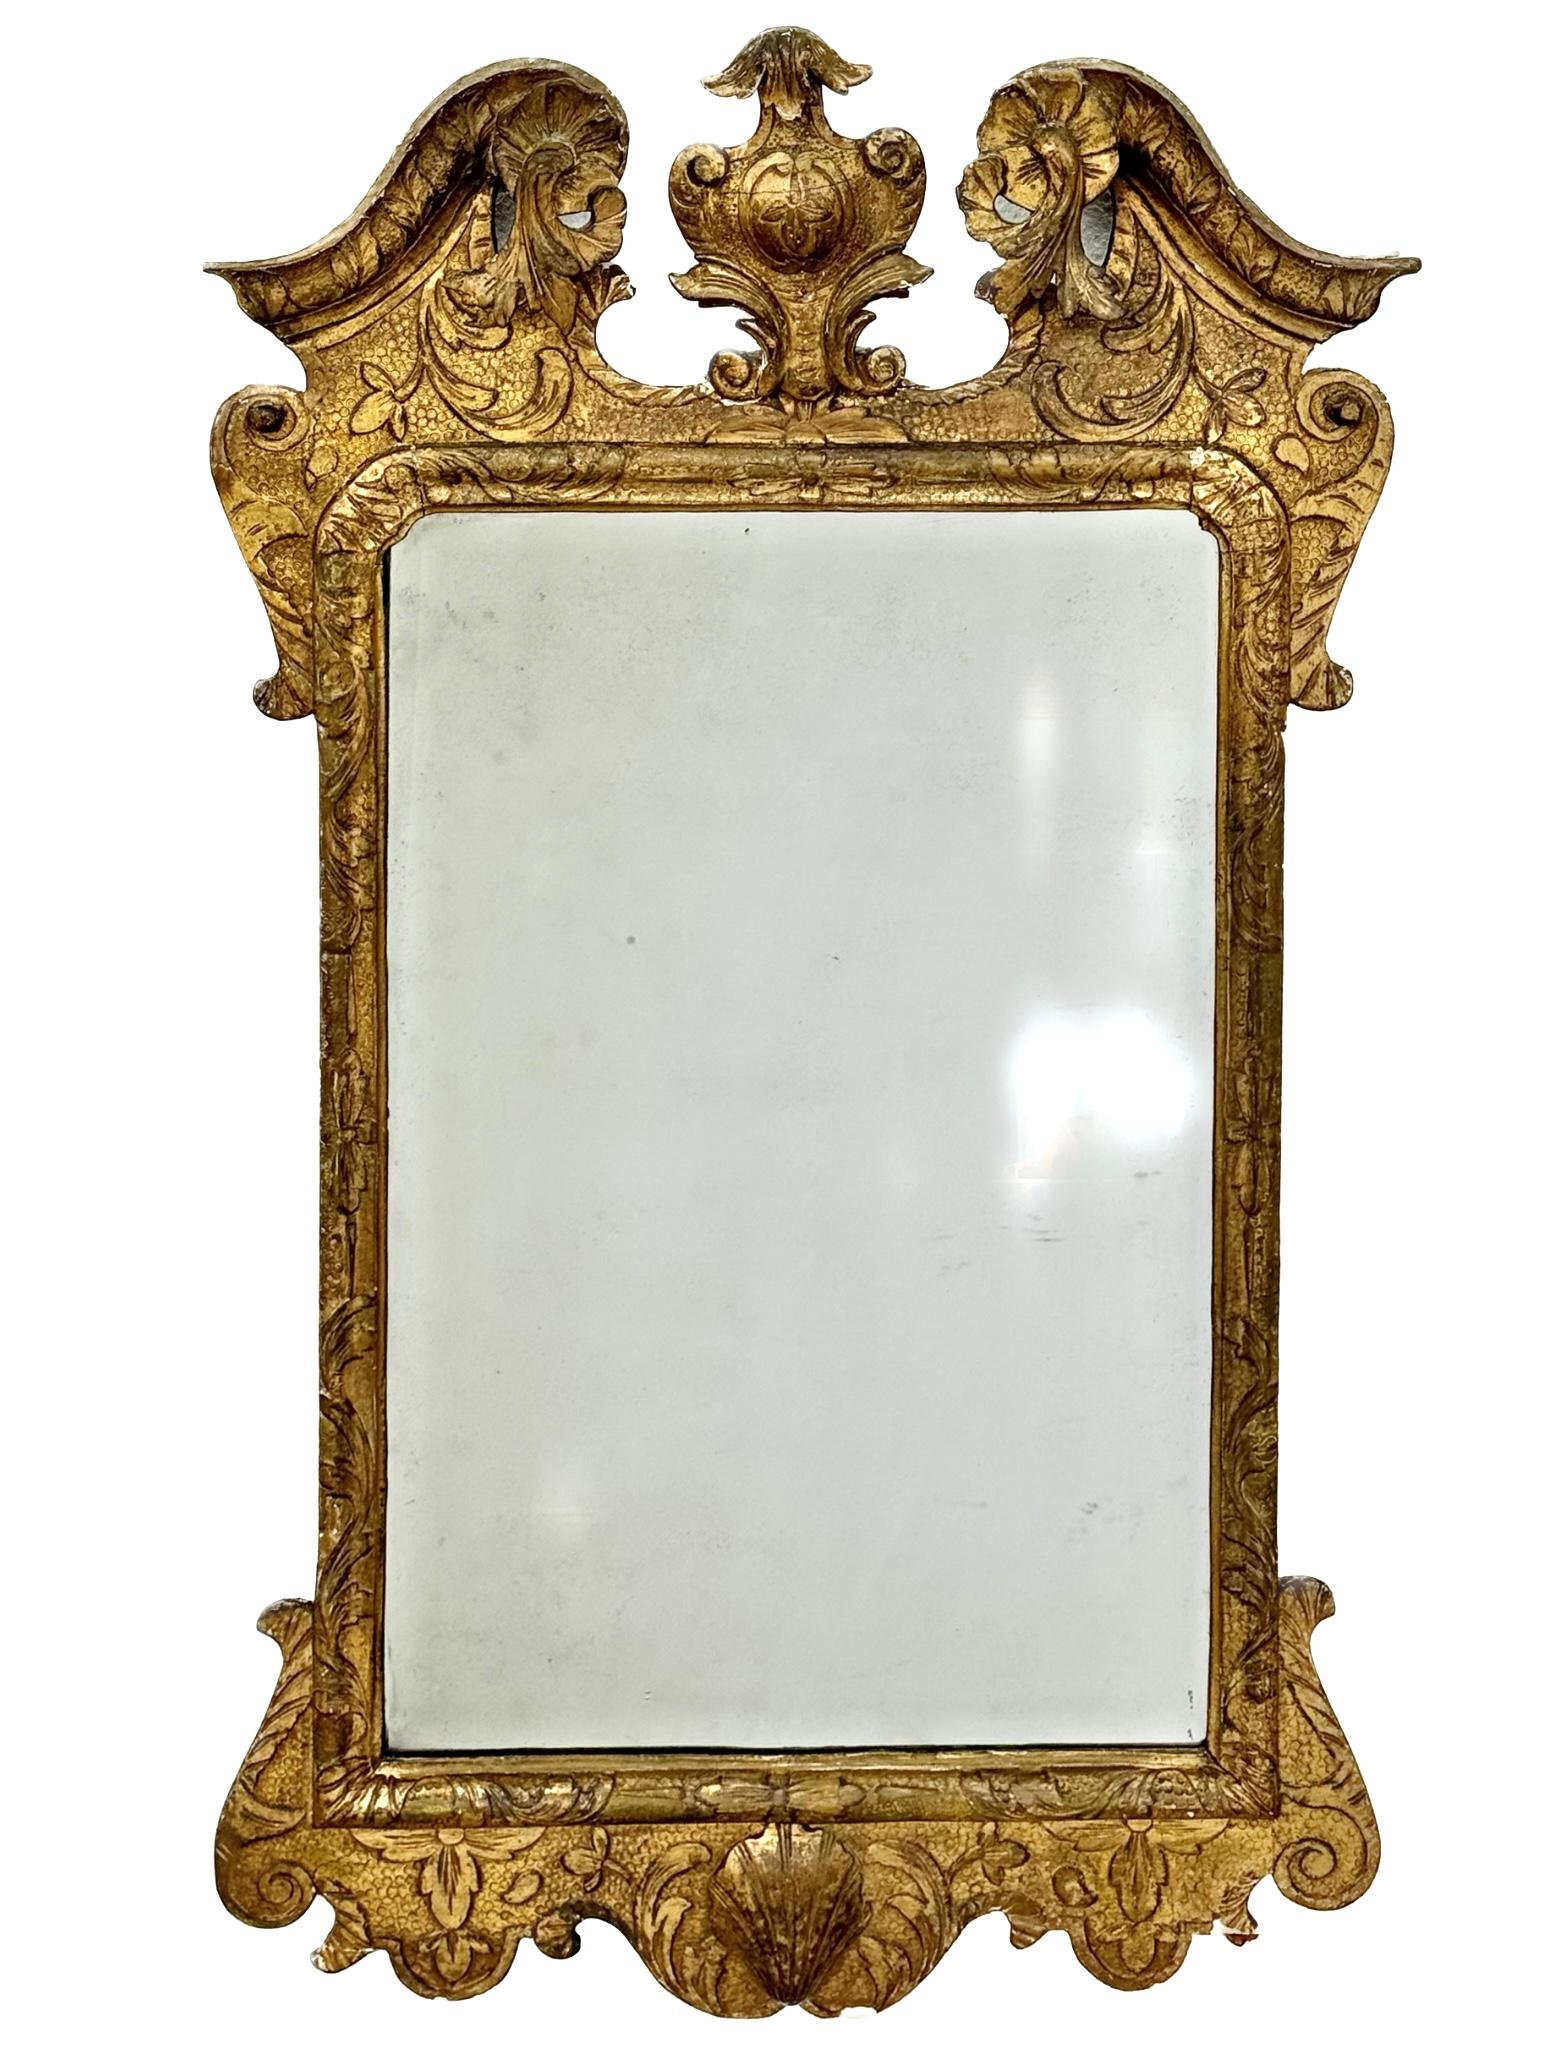 18th century George II giltwood mirror featuring beveled edges and mounted in a gilt frame. Allover carved with scrolling acanthus leaves on a mottled or sanded ground. Geometric-carved border, surmounted by an acanthus-carved broken arch pediment